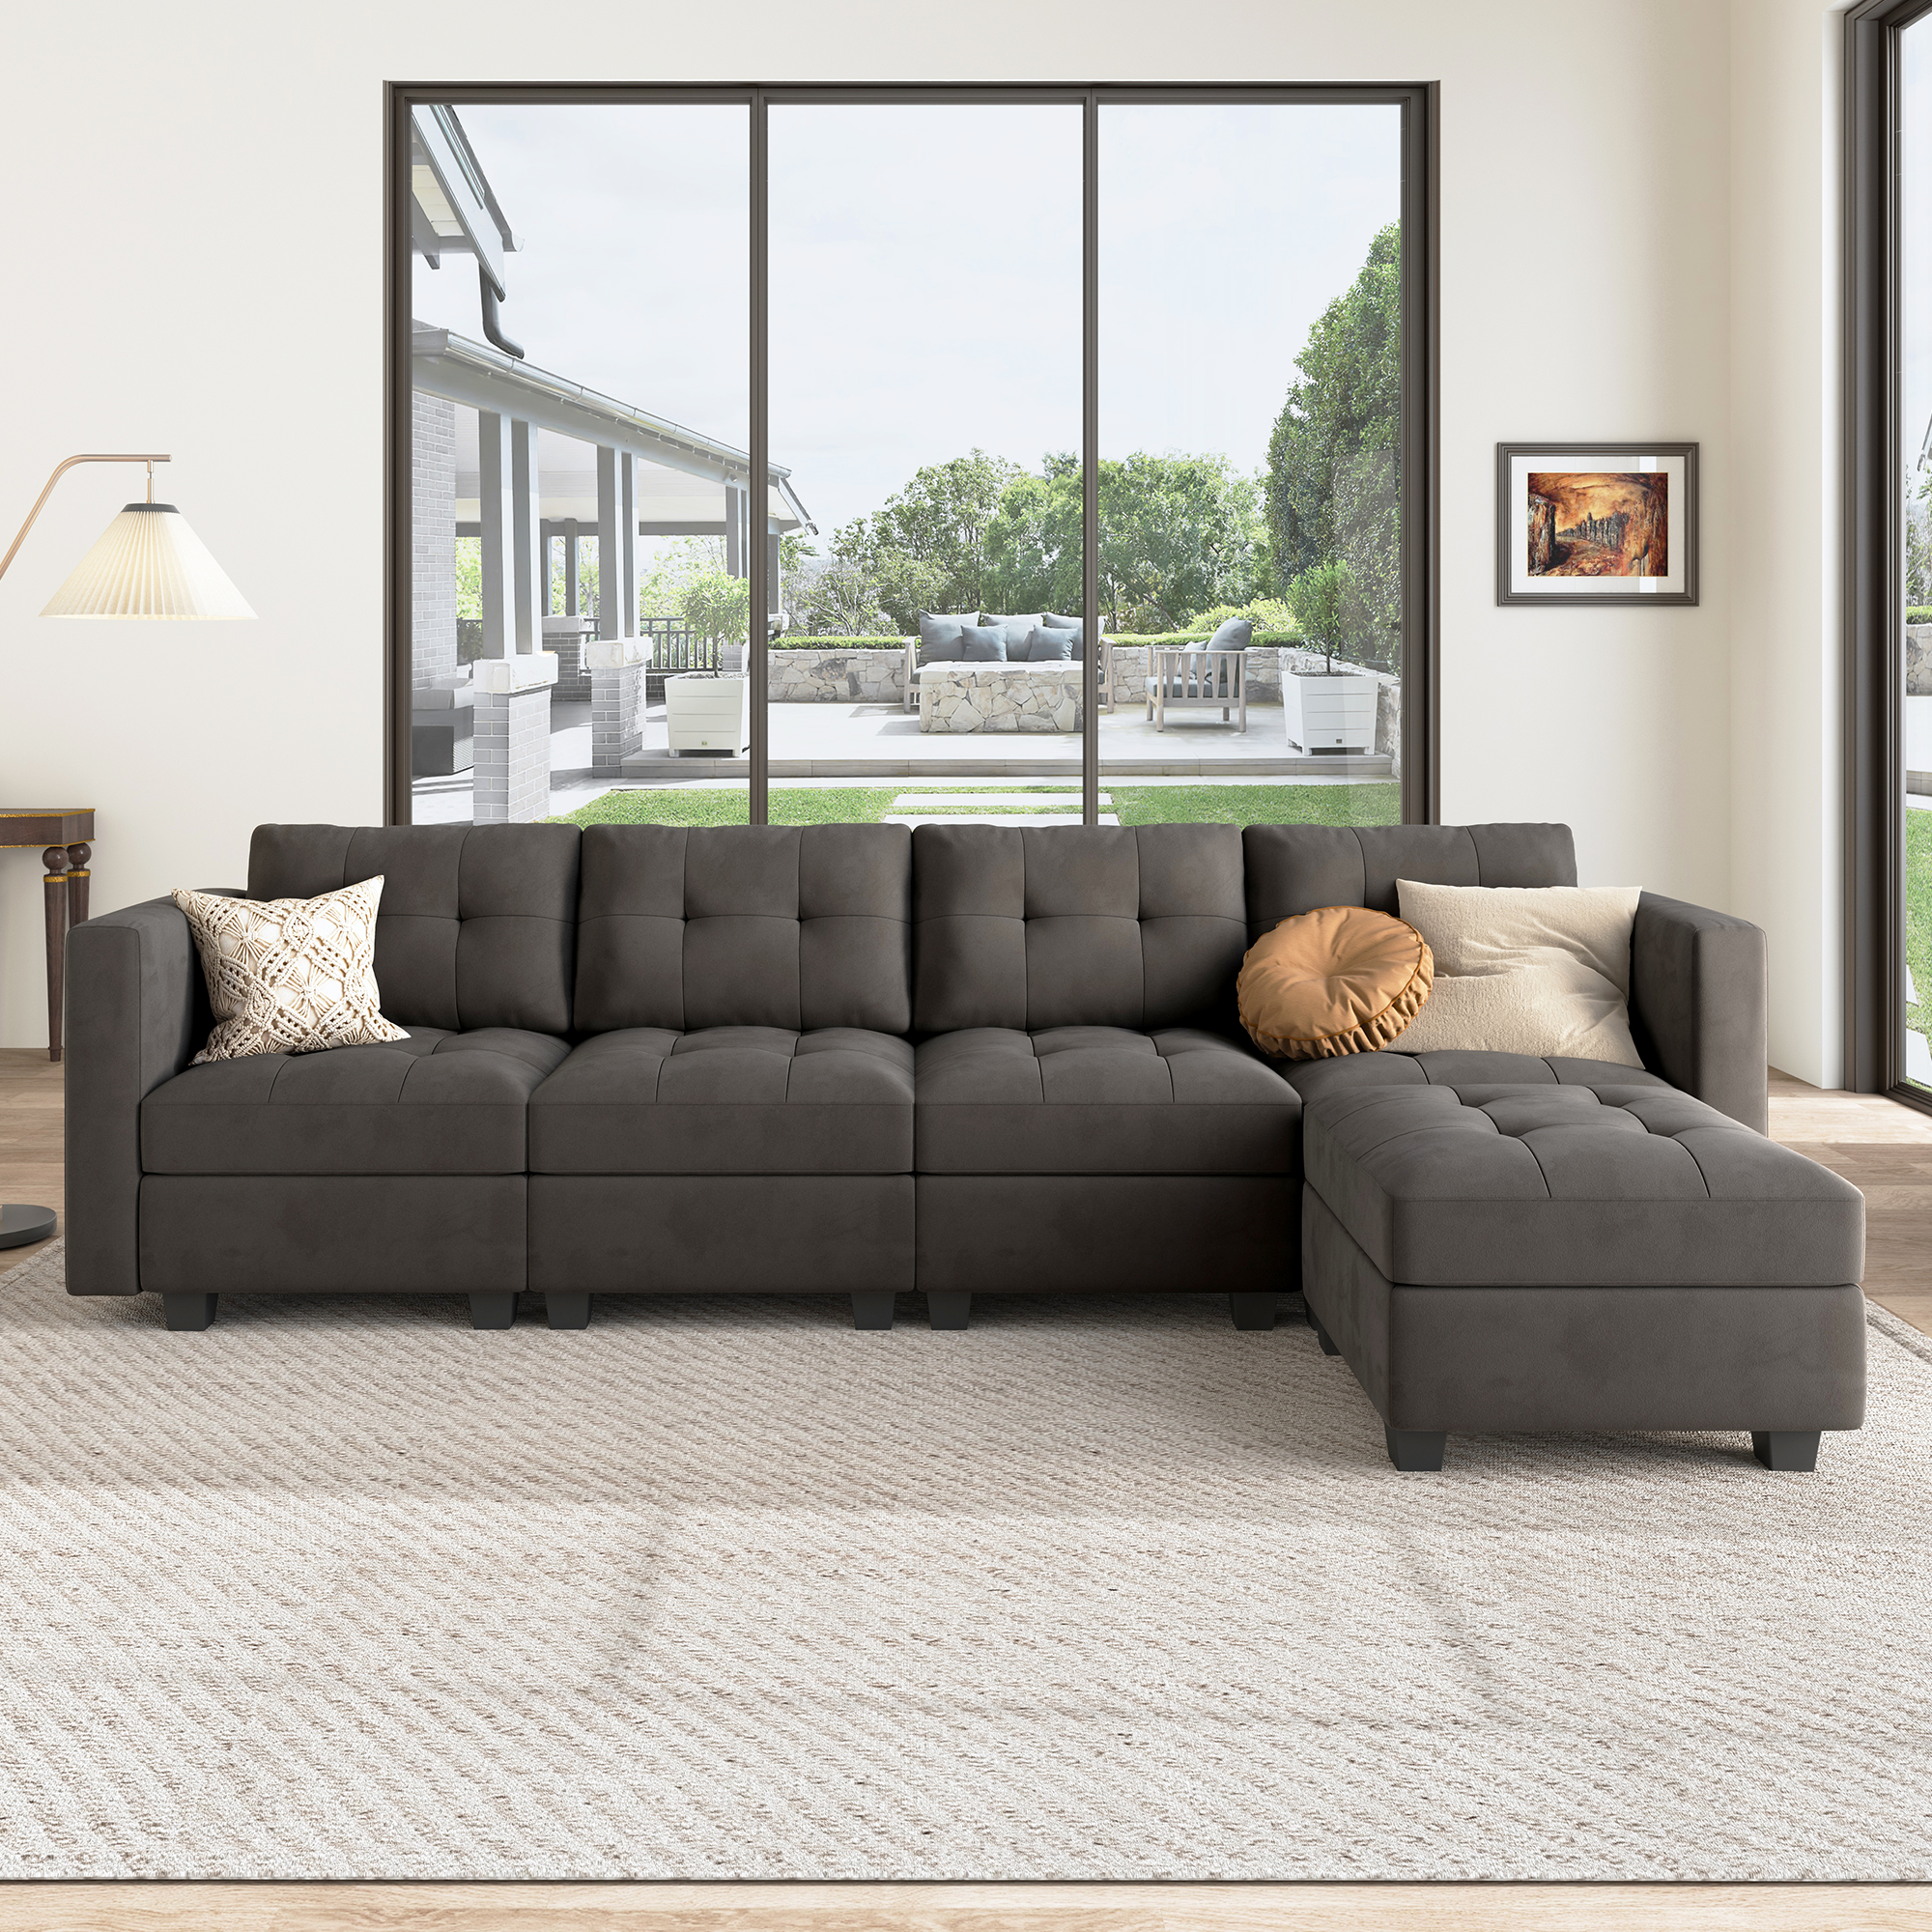 HONBAY Tufted Modular Sofa 4-Seat+1-Side Armrest+1-Ottoman with Storage Seater